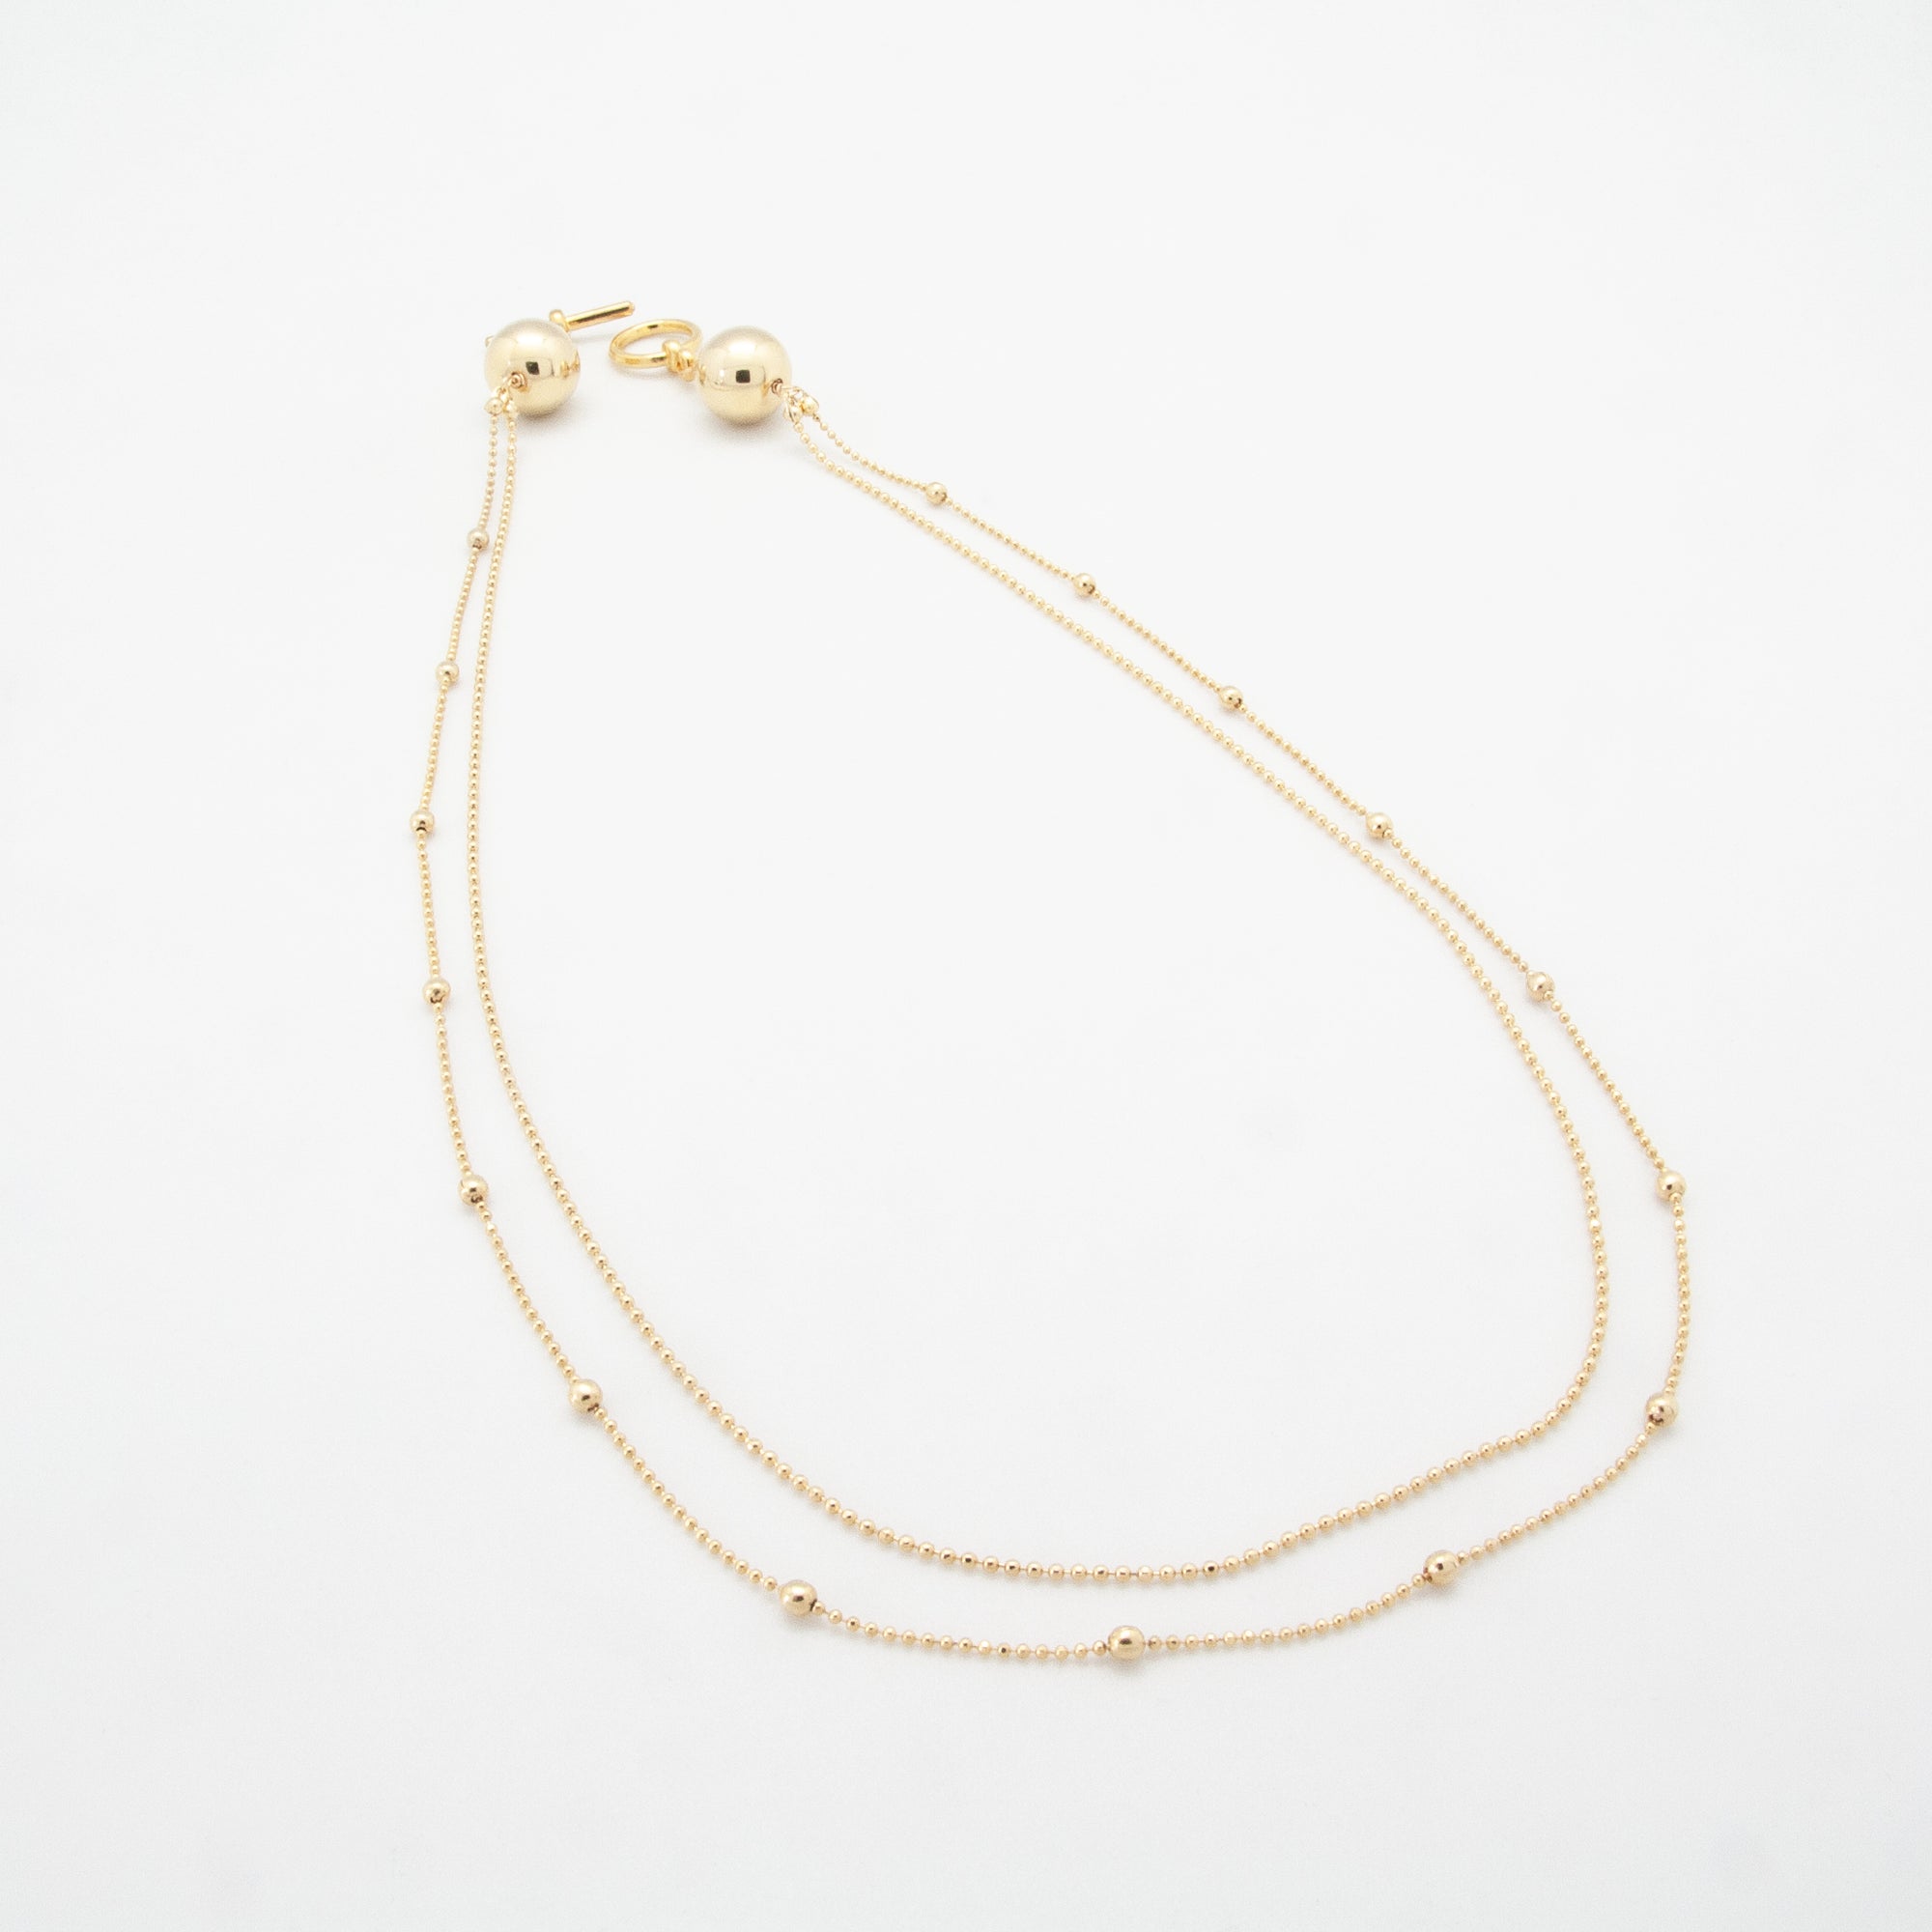 Double Ball Necklace, Vivien Walsh